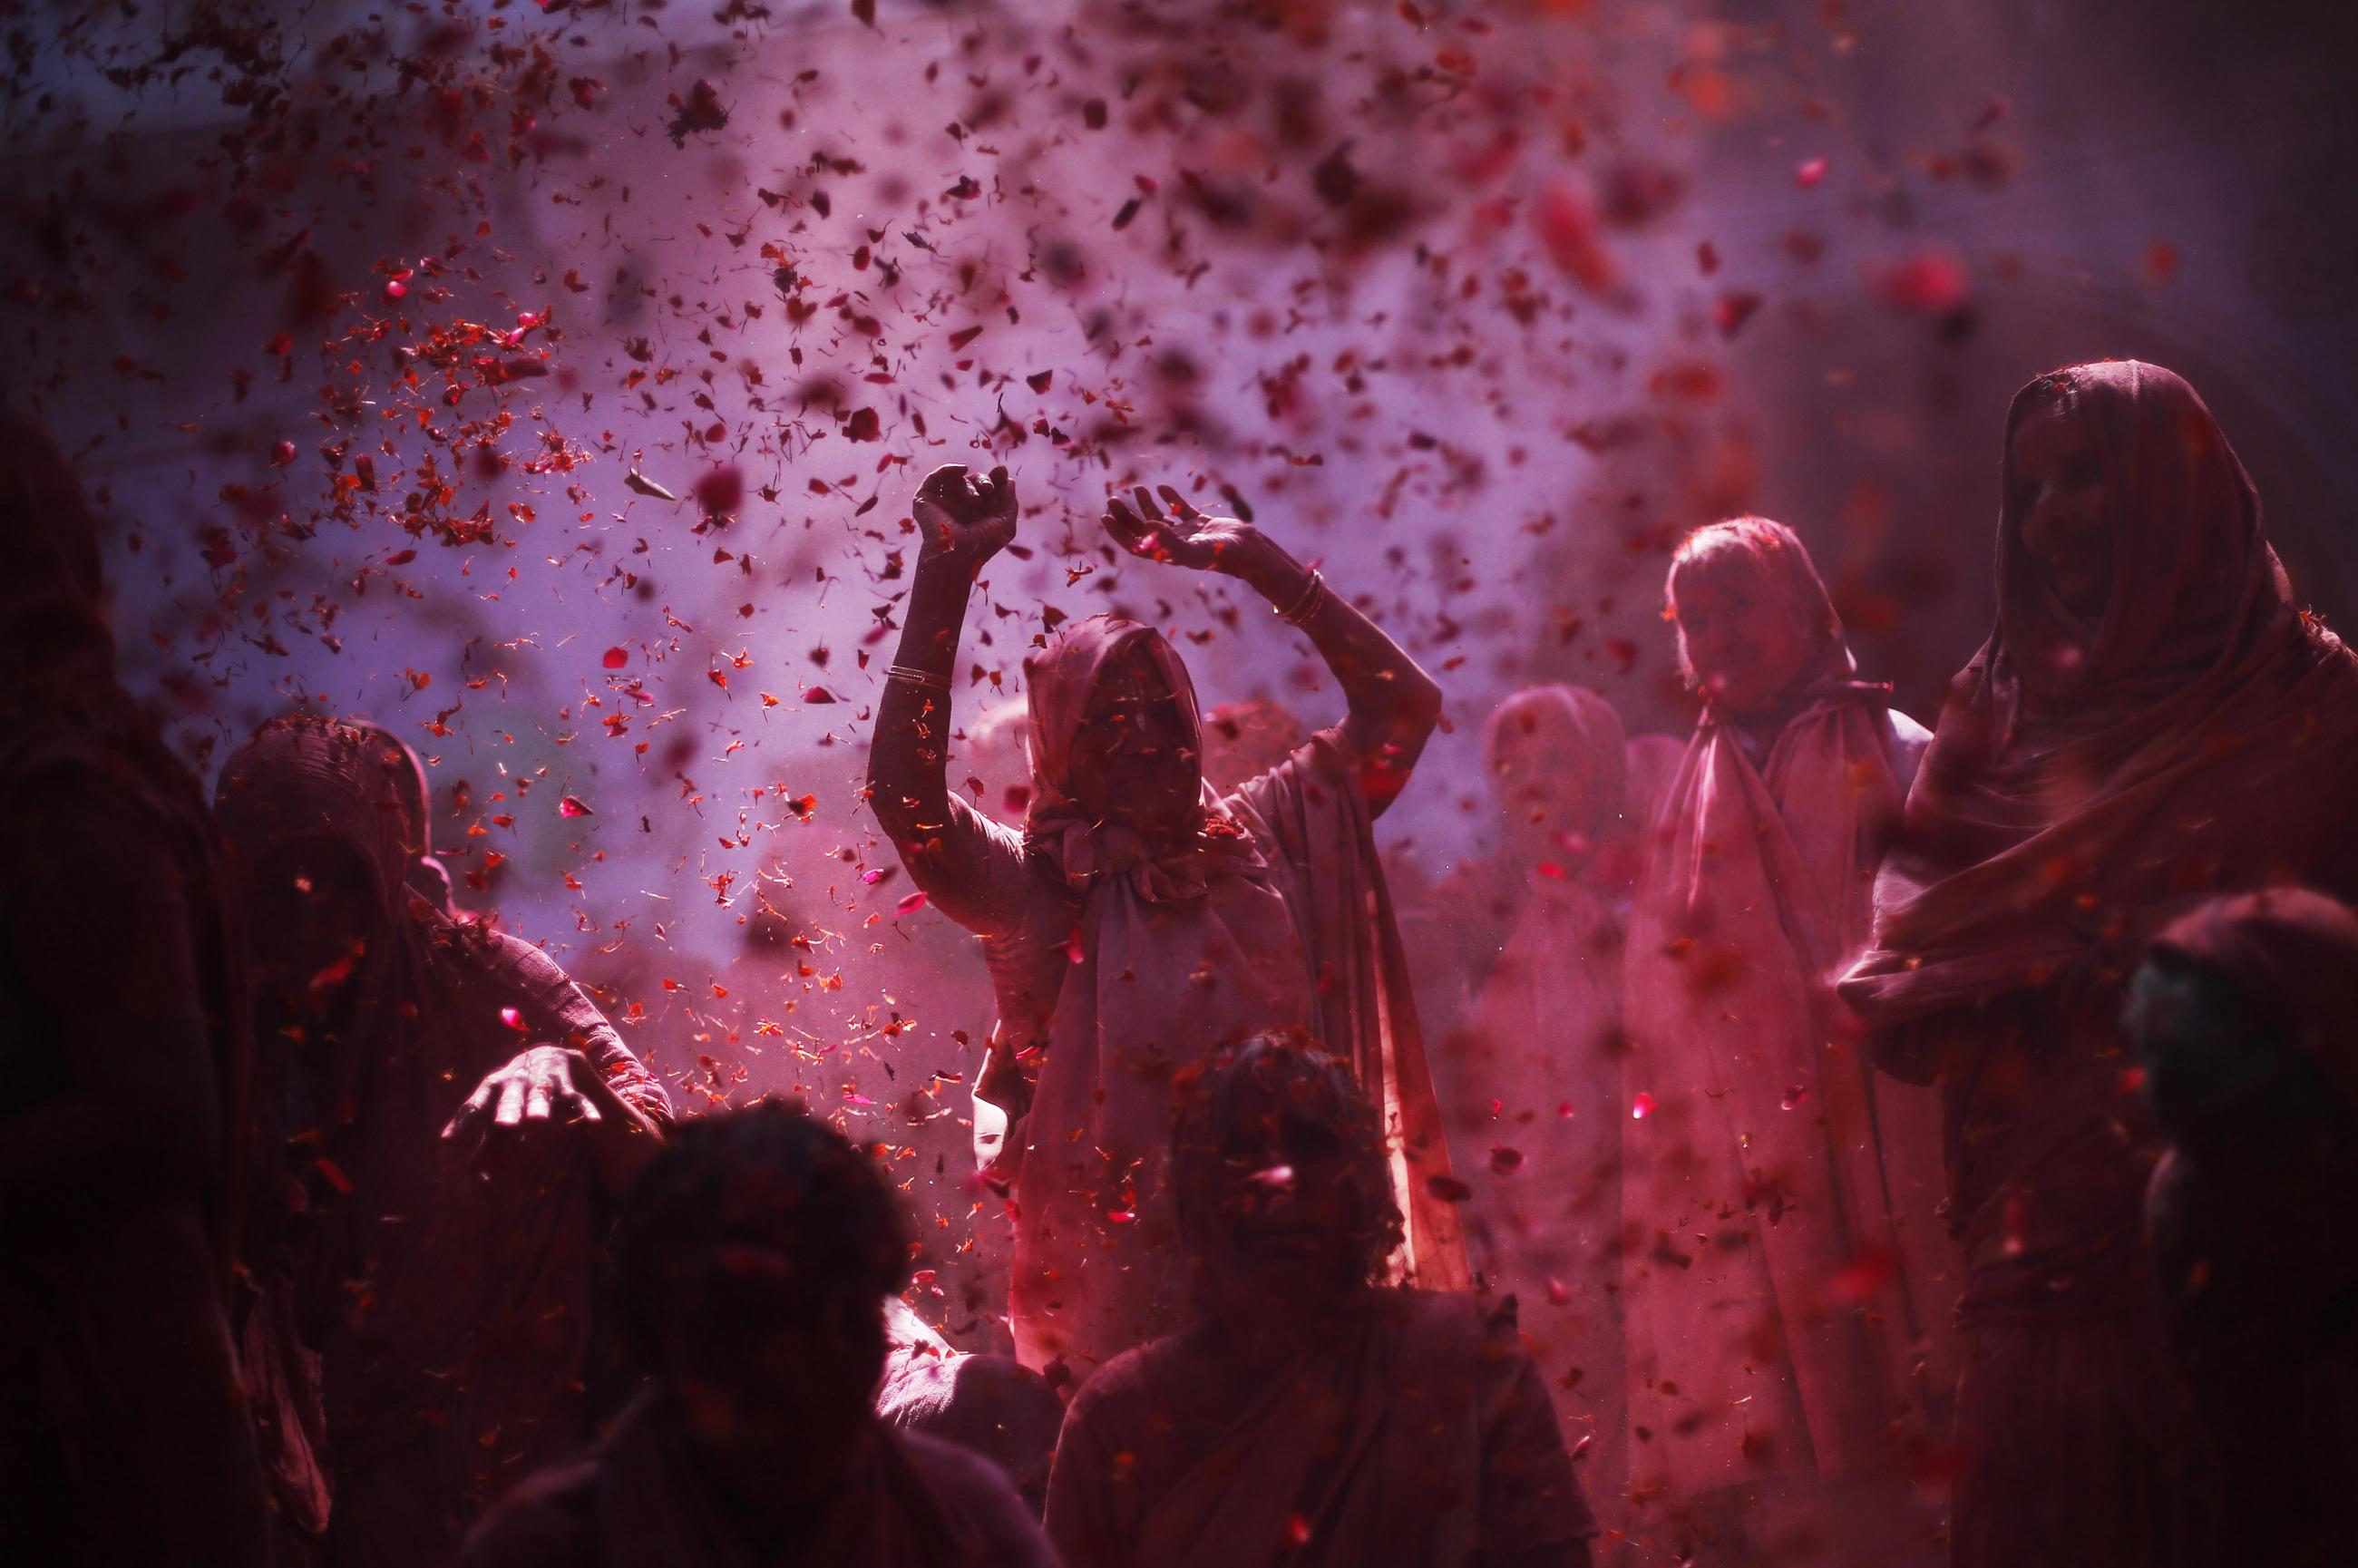 Widows daubed in colours chant religious hymns as they take part in the Holi celebrations organised by non-governmental organisation Sulabh International at a widows' ashram at Vrindavan in the northern Indian state of Uttar Pradesh March 5, 2015